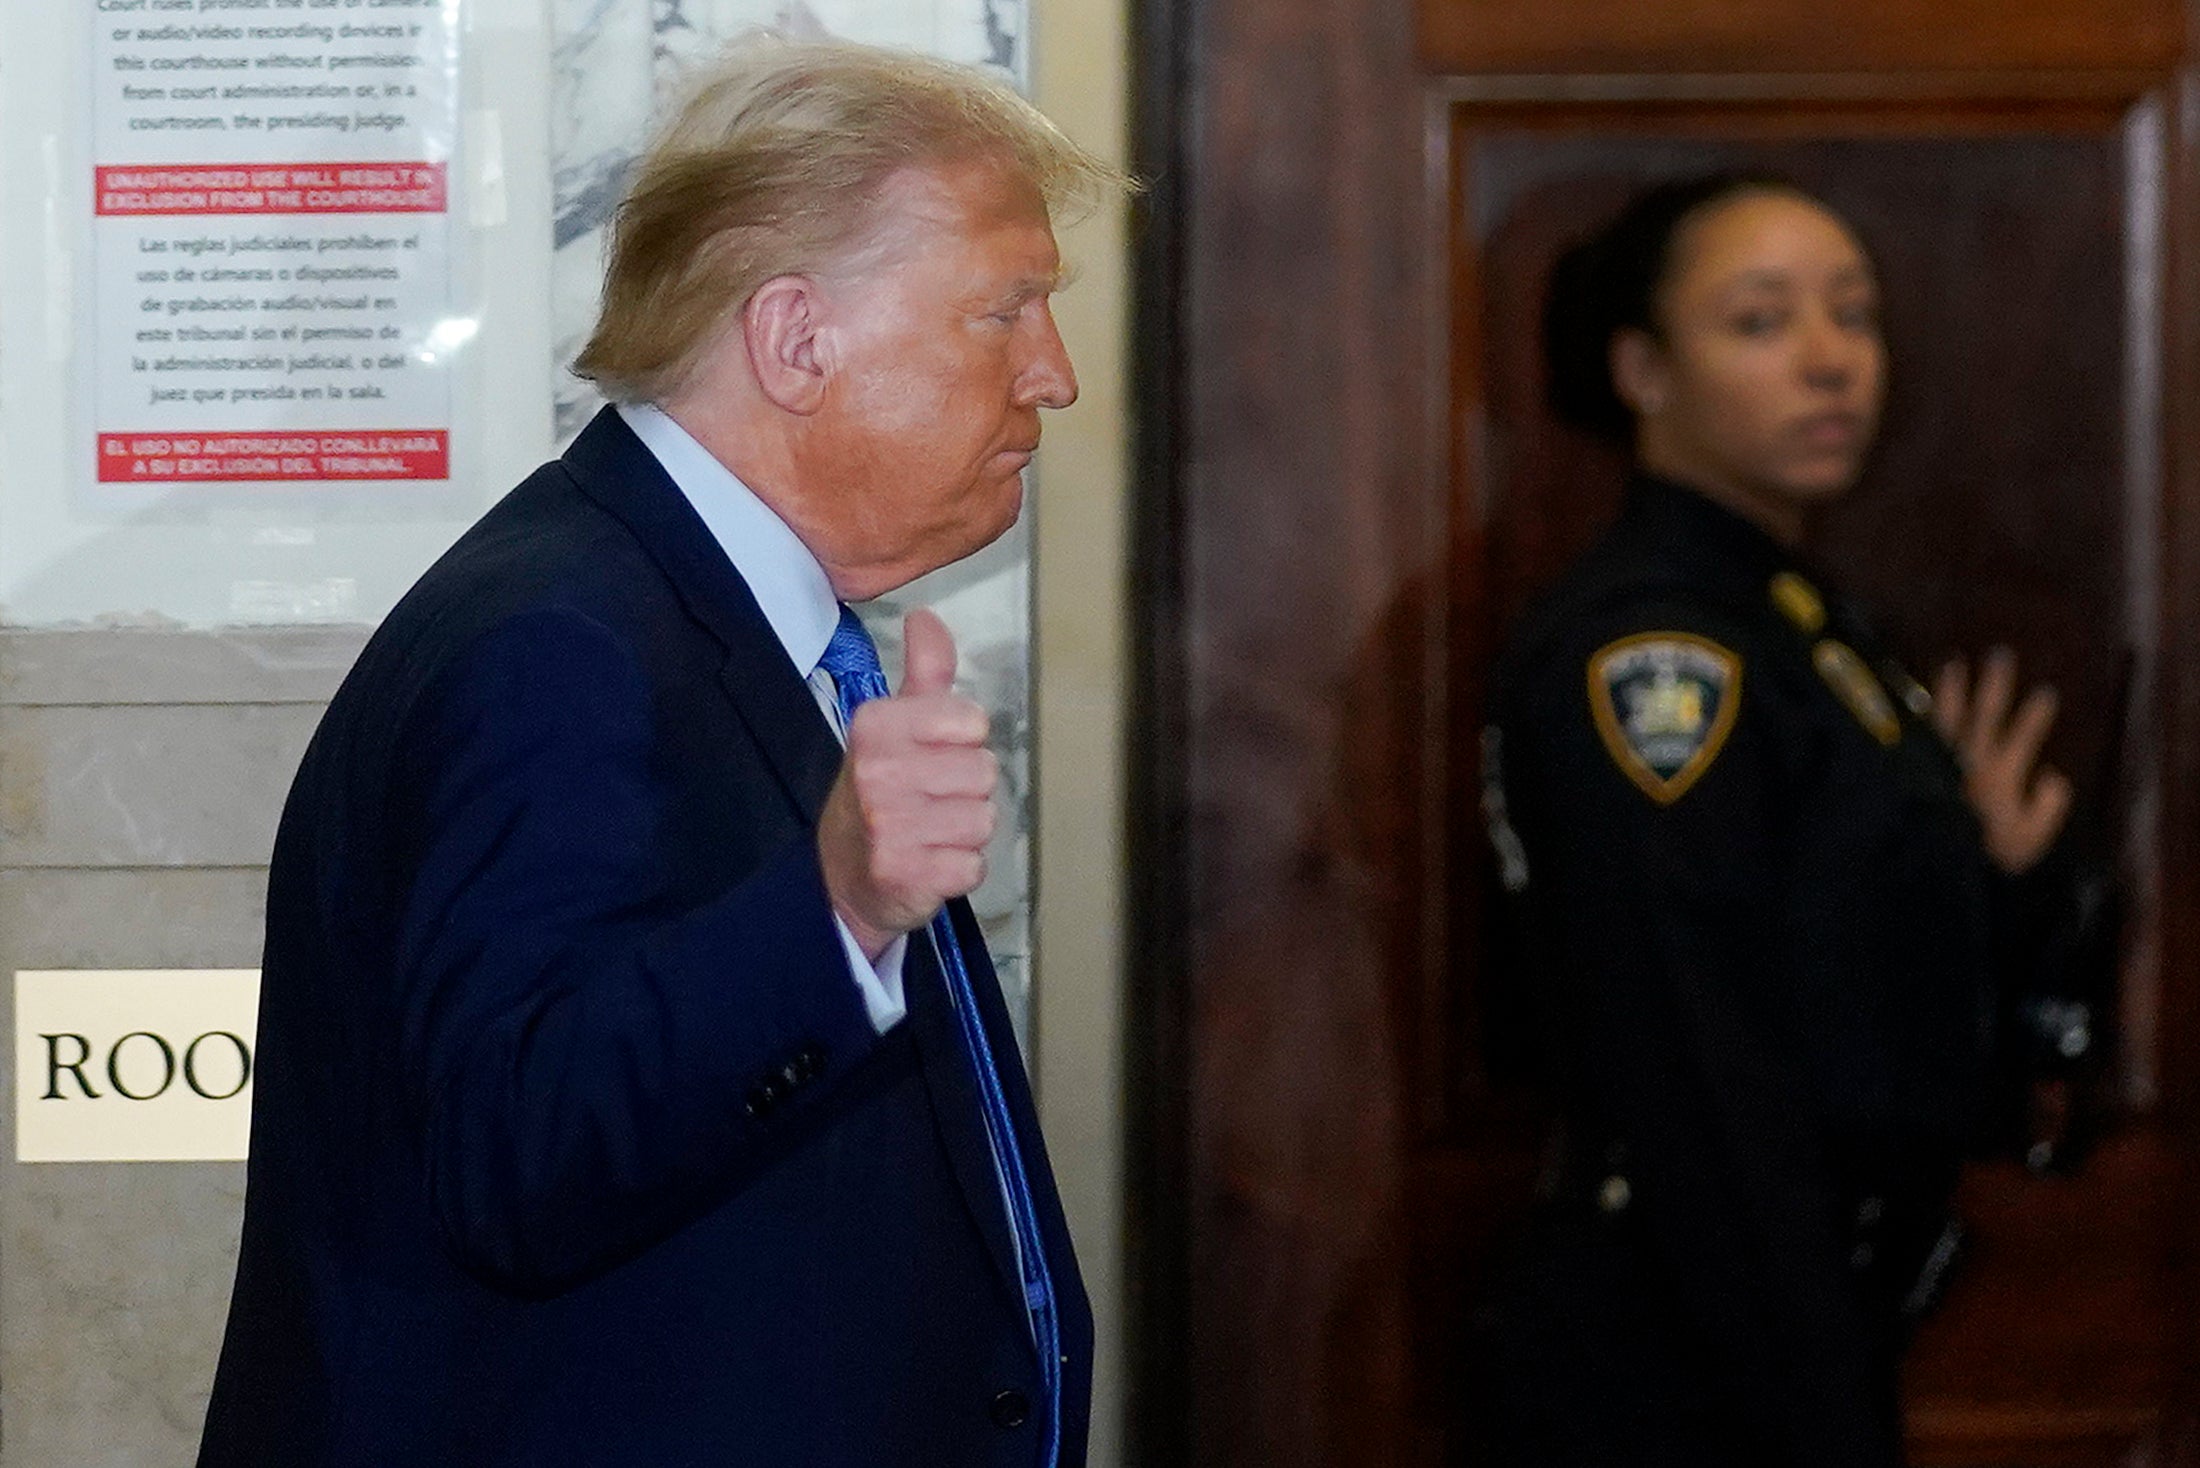 Donald Trump flashes a thumbs up as he returns to the courtroom on 6 November